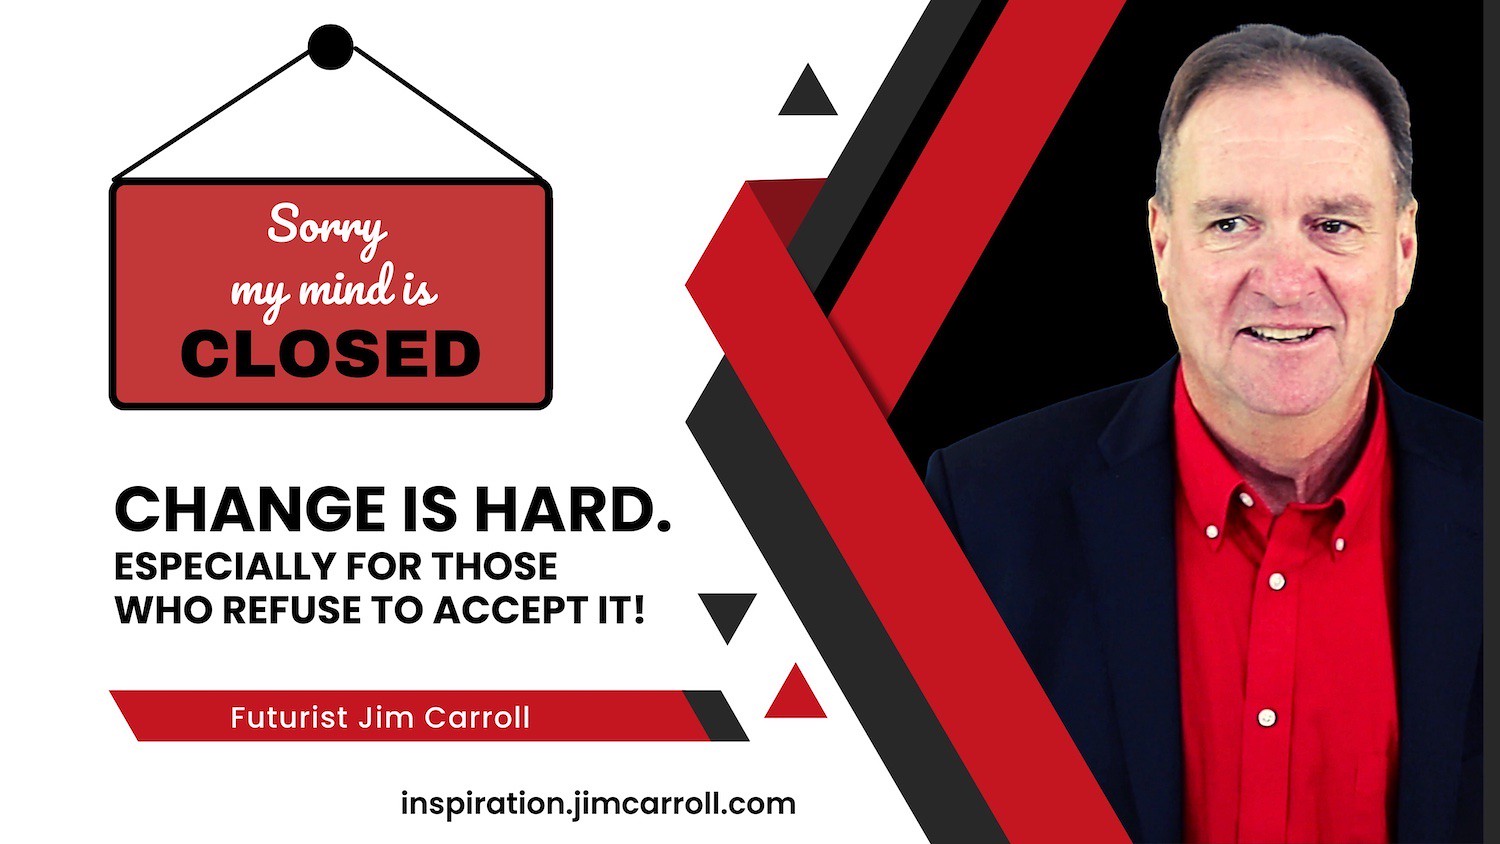 "Change is hard. Especially for those who refuse to accept it!" - Futurist Jim Carroll